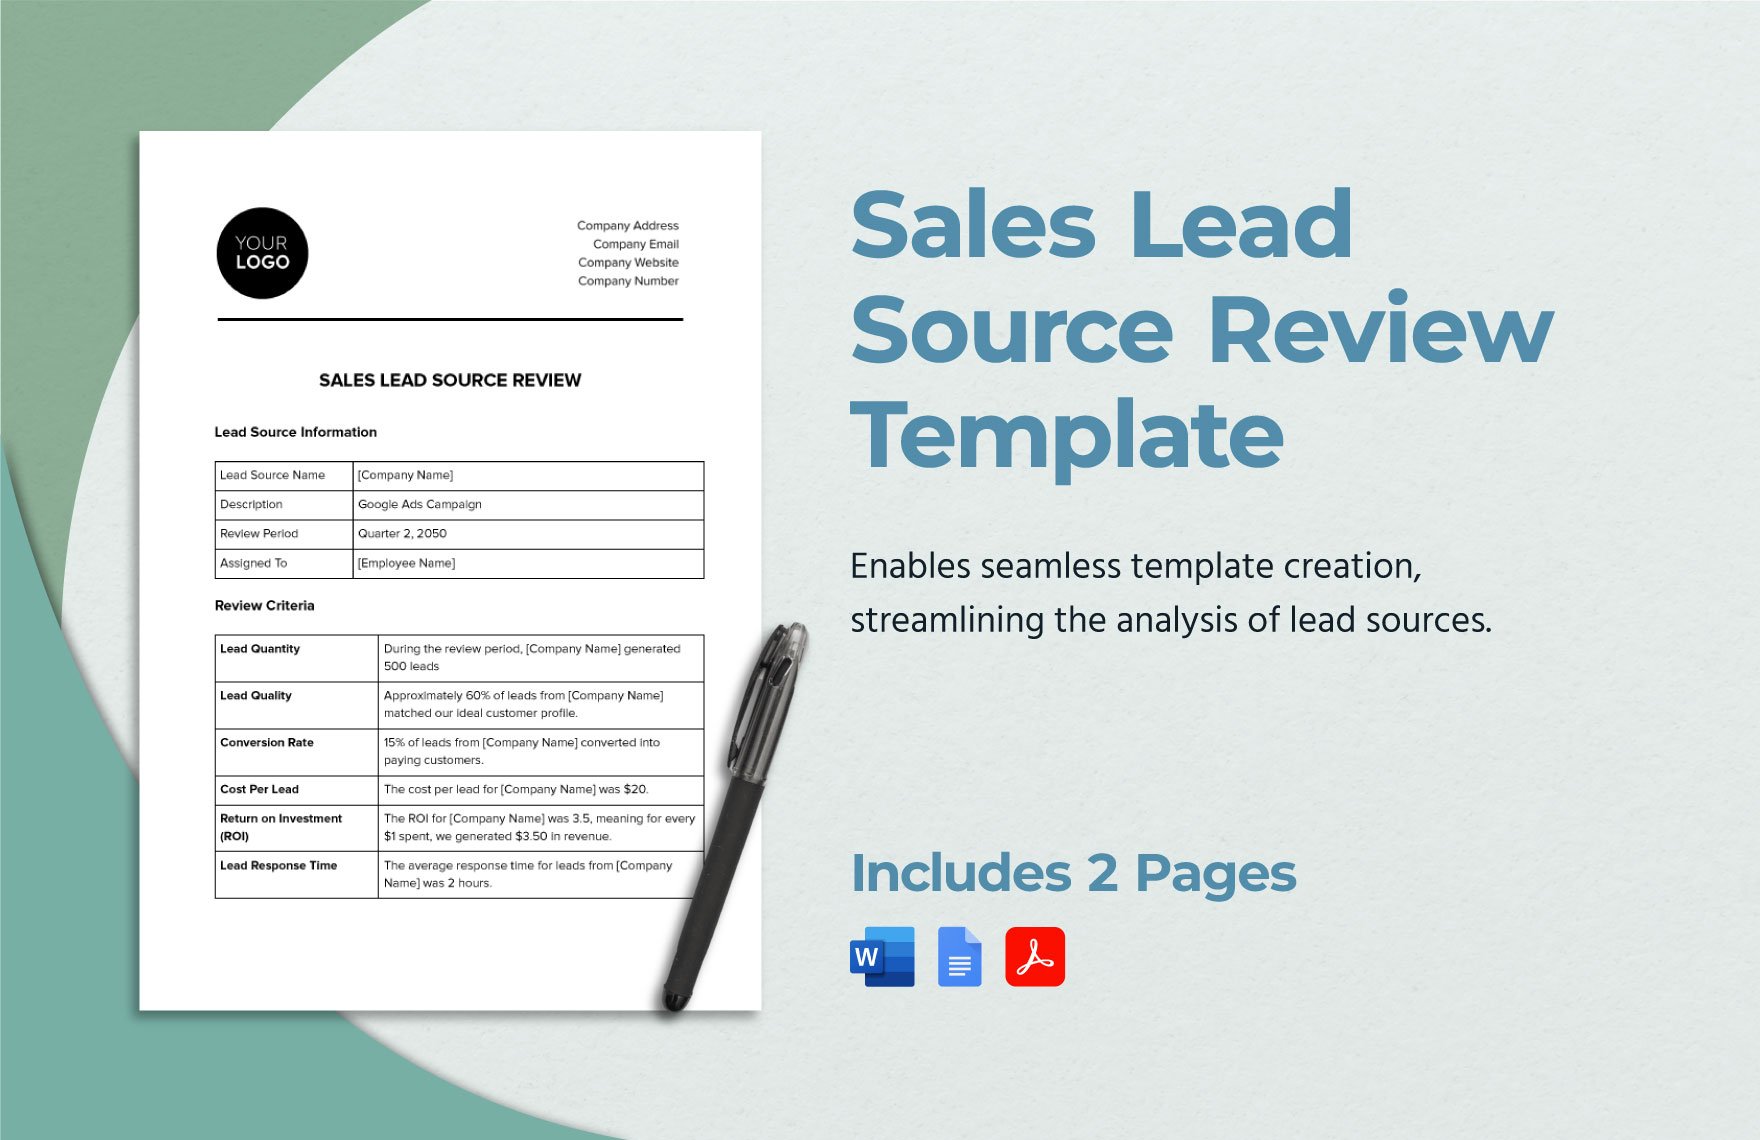 Sales Lead Source Review Template